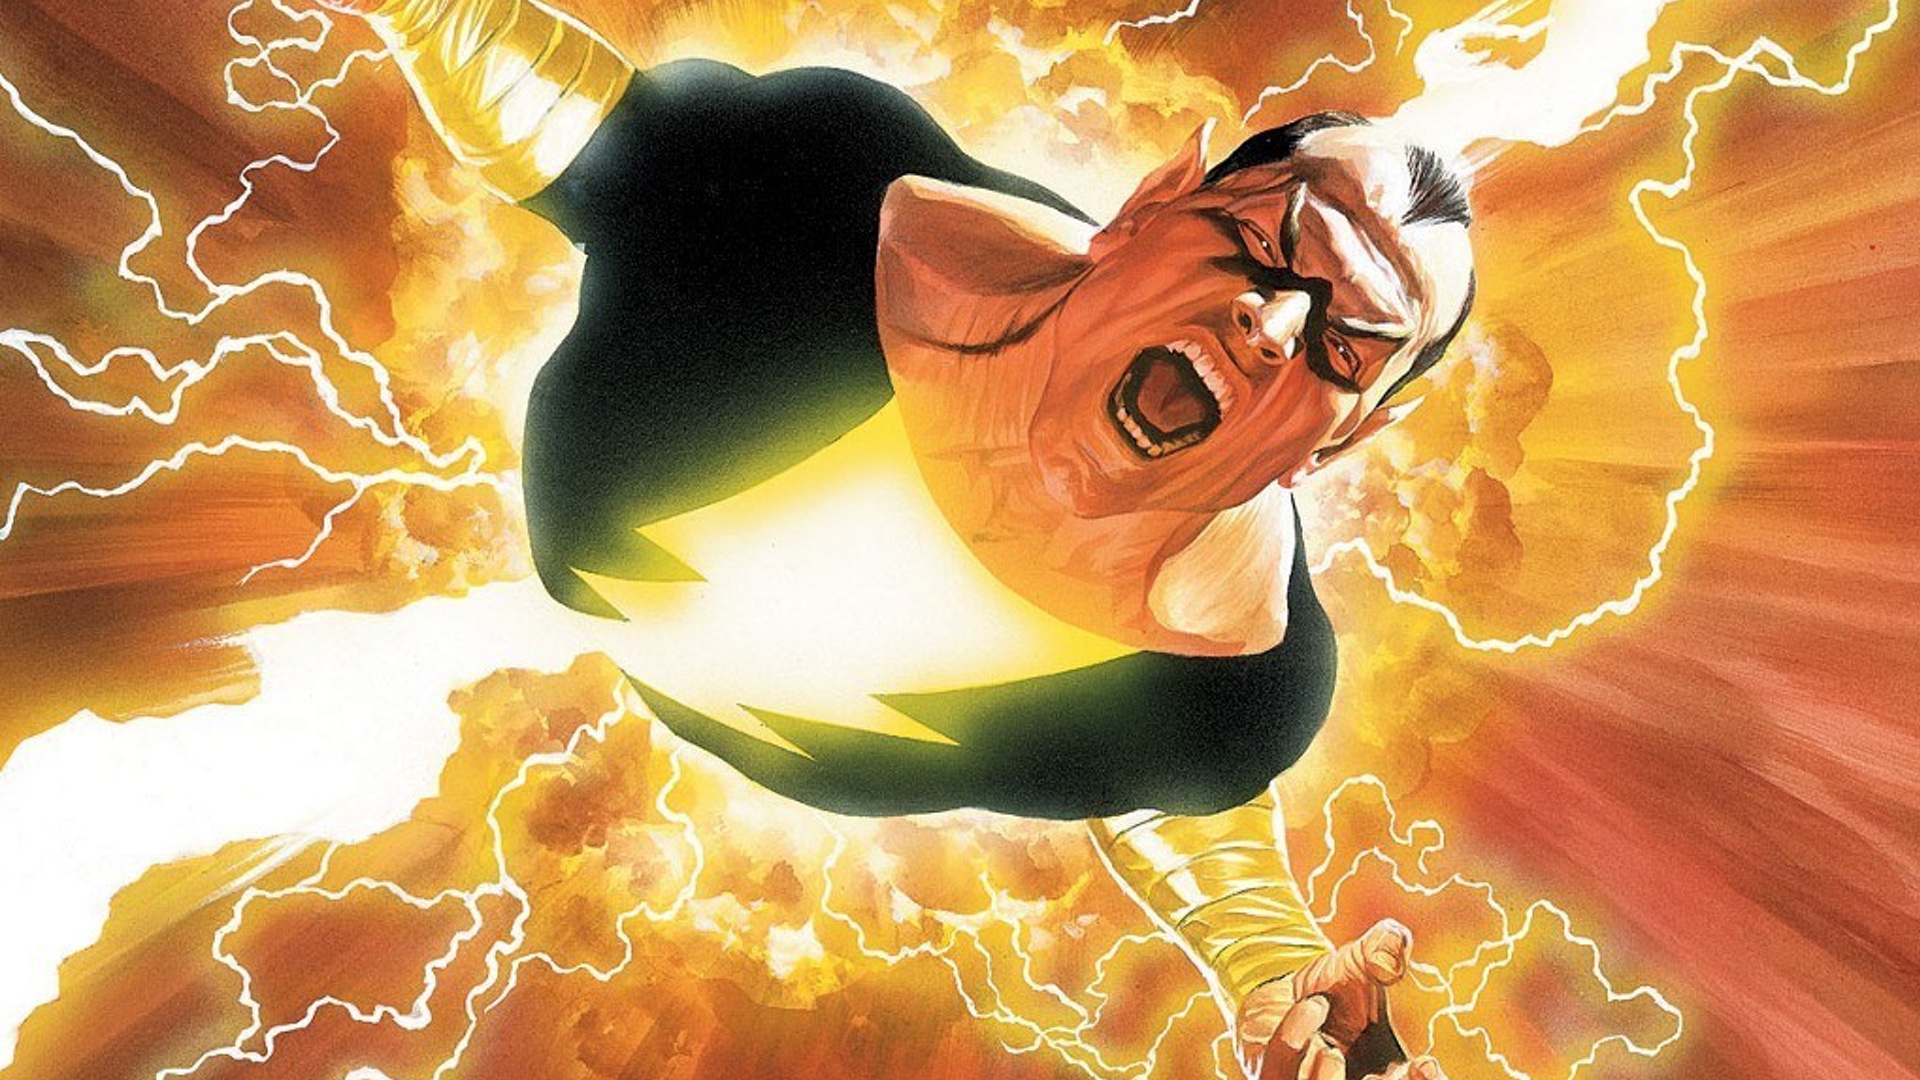 How are Black Adam and Shazam connected and why were films split